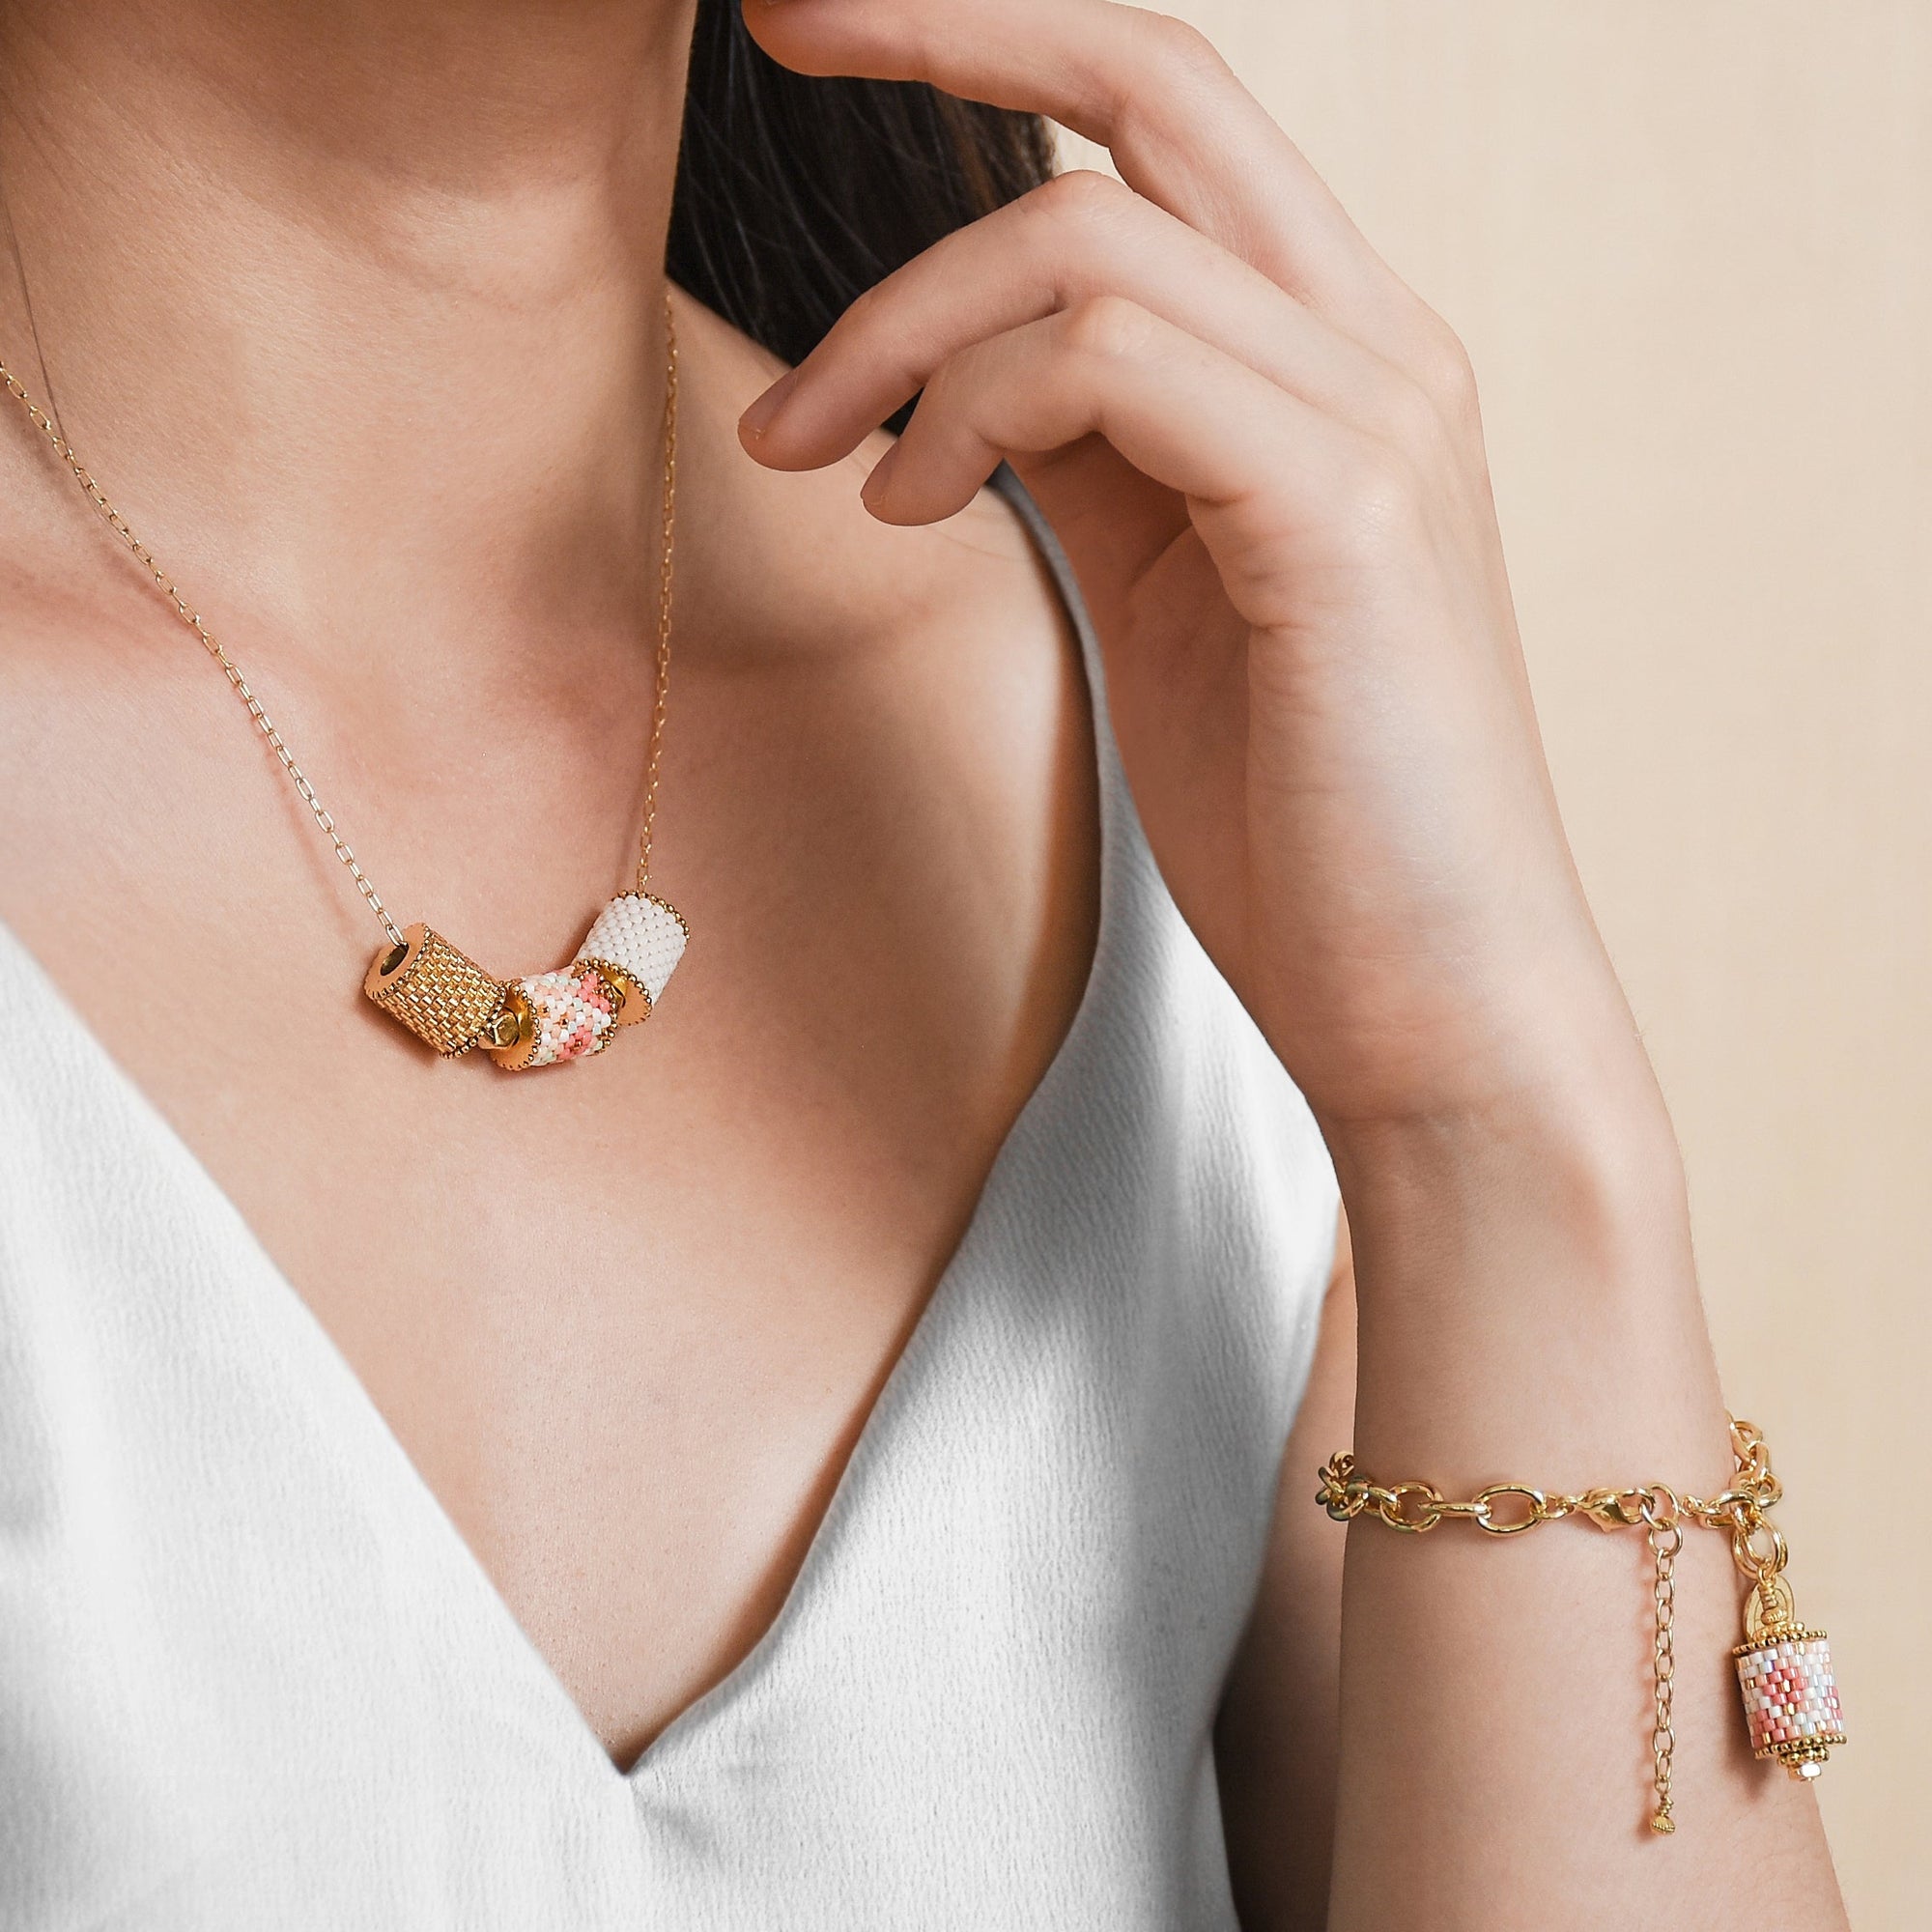 Ethical handcrafted jewelry | EDEN + ELIE